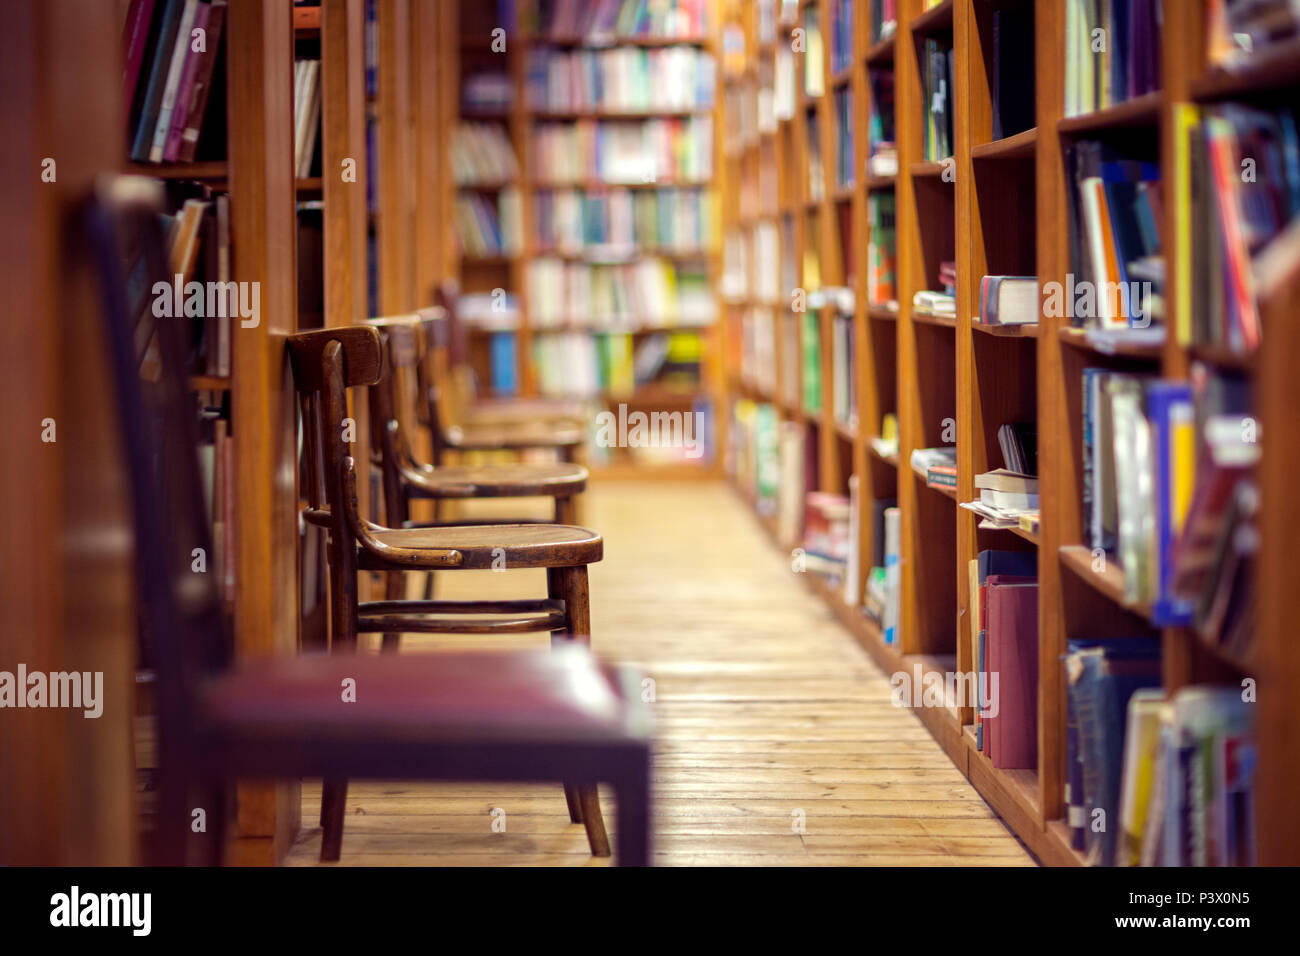 Library with rows of books on shelves and empty chairs Stock Photo